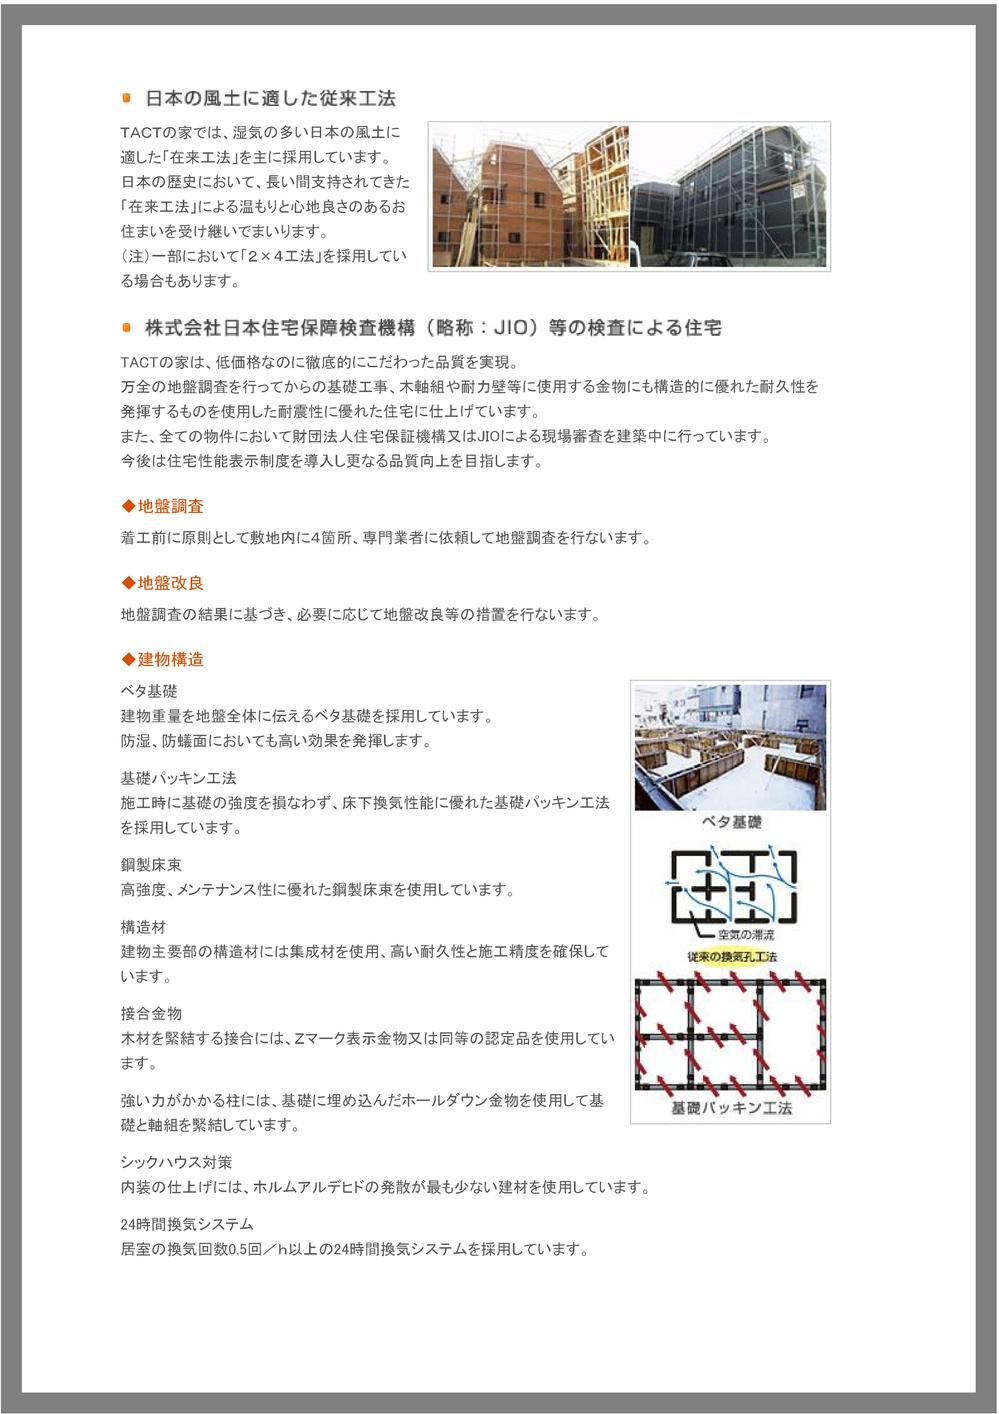 Construction ・ Construction method ・ specification. Basic packing structure